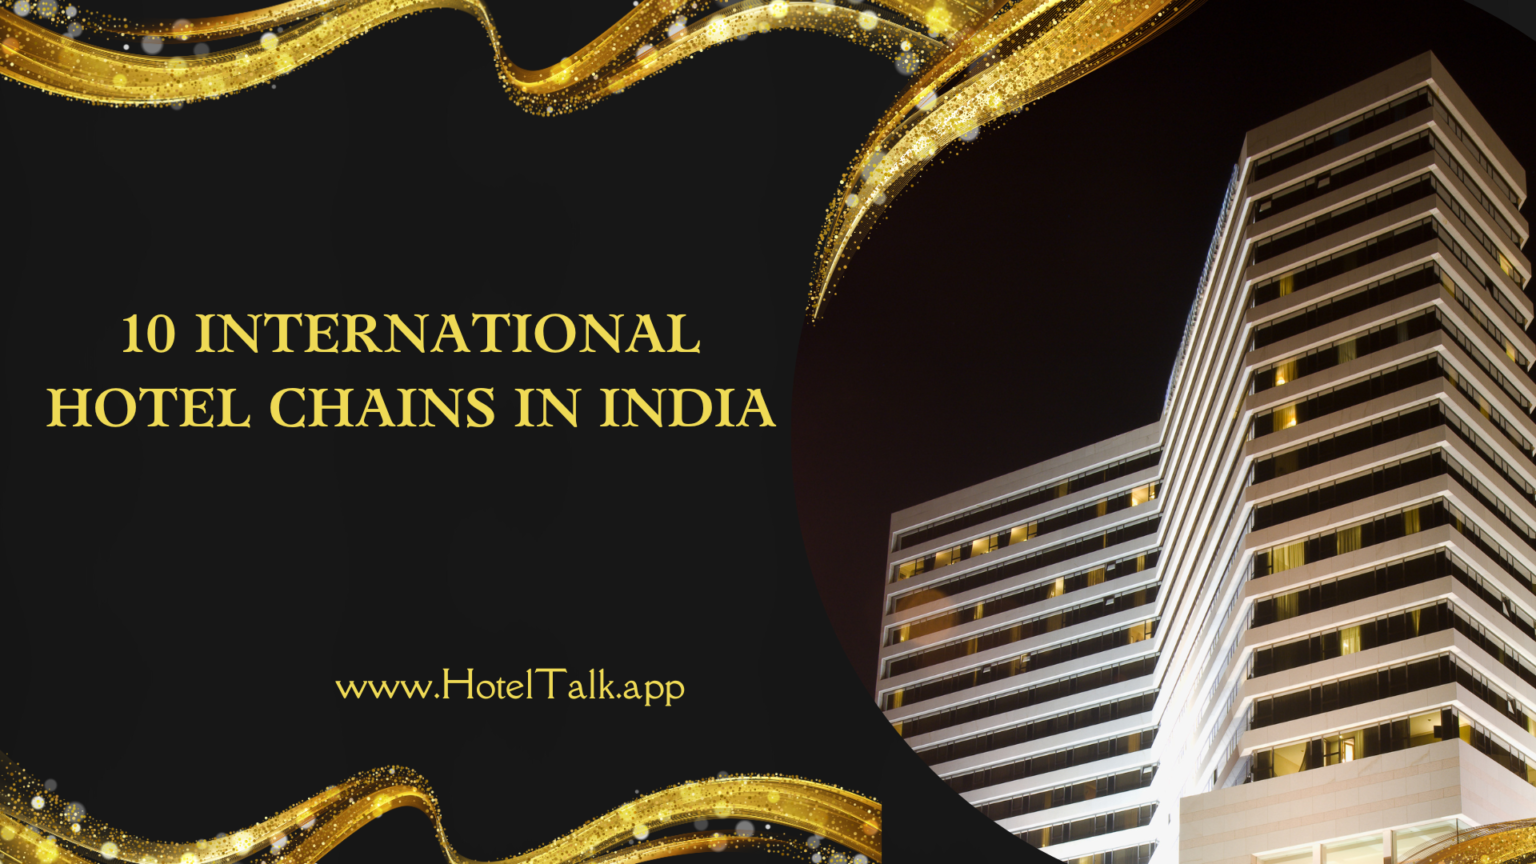 10 International Hotel Chains In India 1536x864 